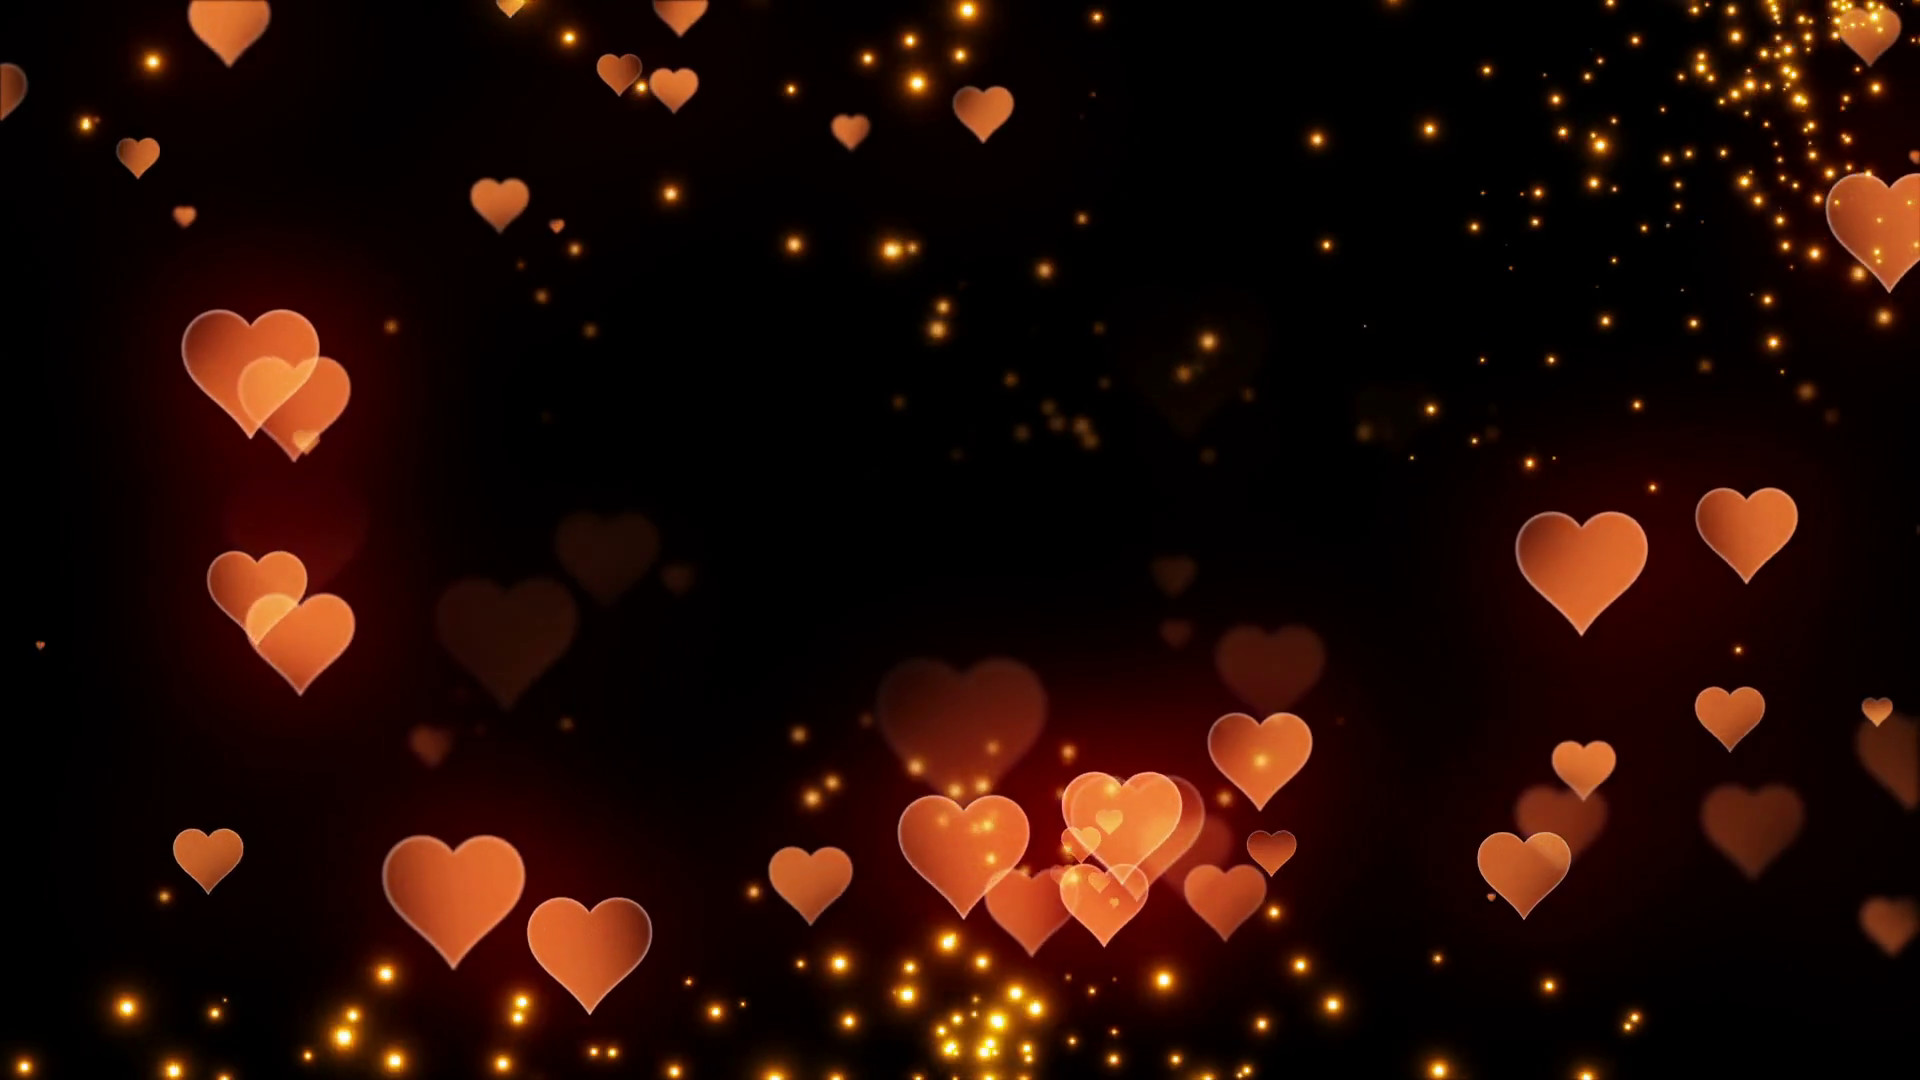 1920x1080 Floating Little Hearts Glowing Twinkling Sparkling Particles | Seamless  Motion Background | Full HD 1920 X 1080 | Gold Golden Orange Over Black  Backdrop ...